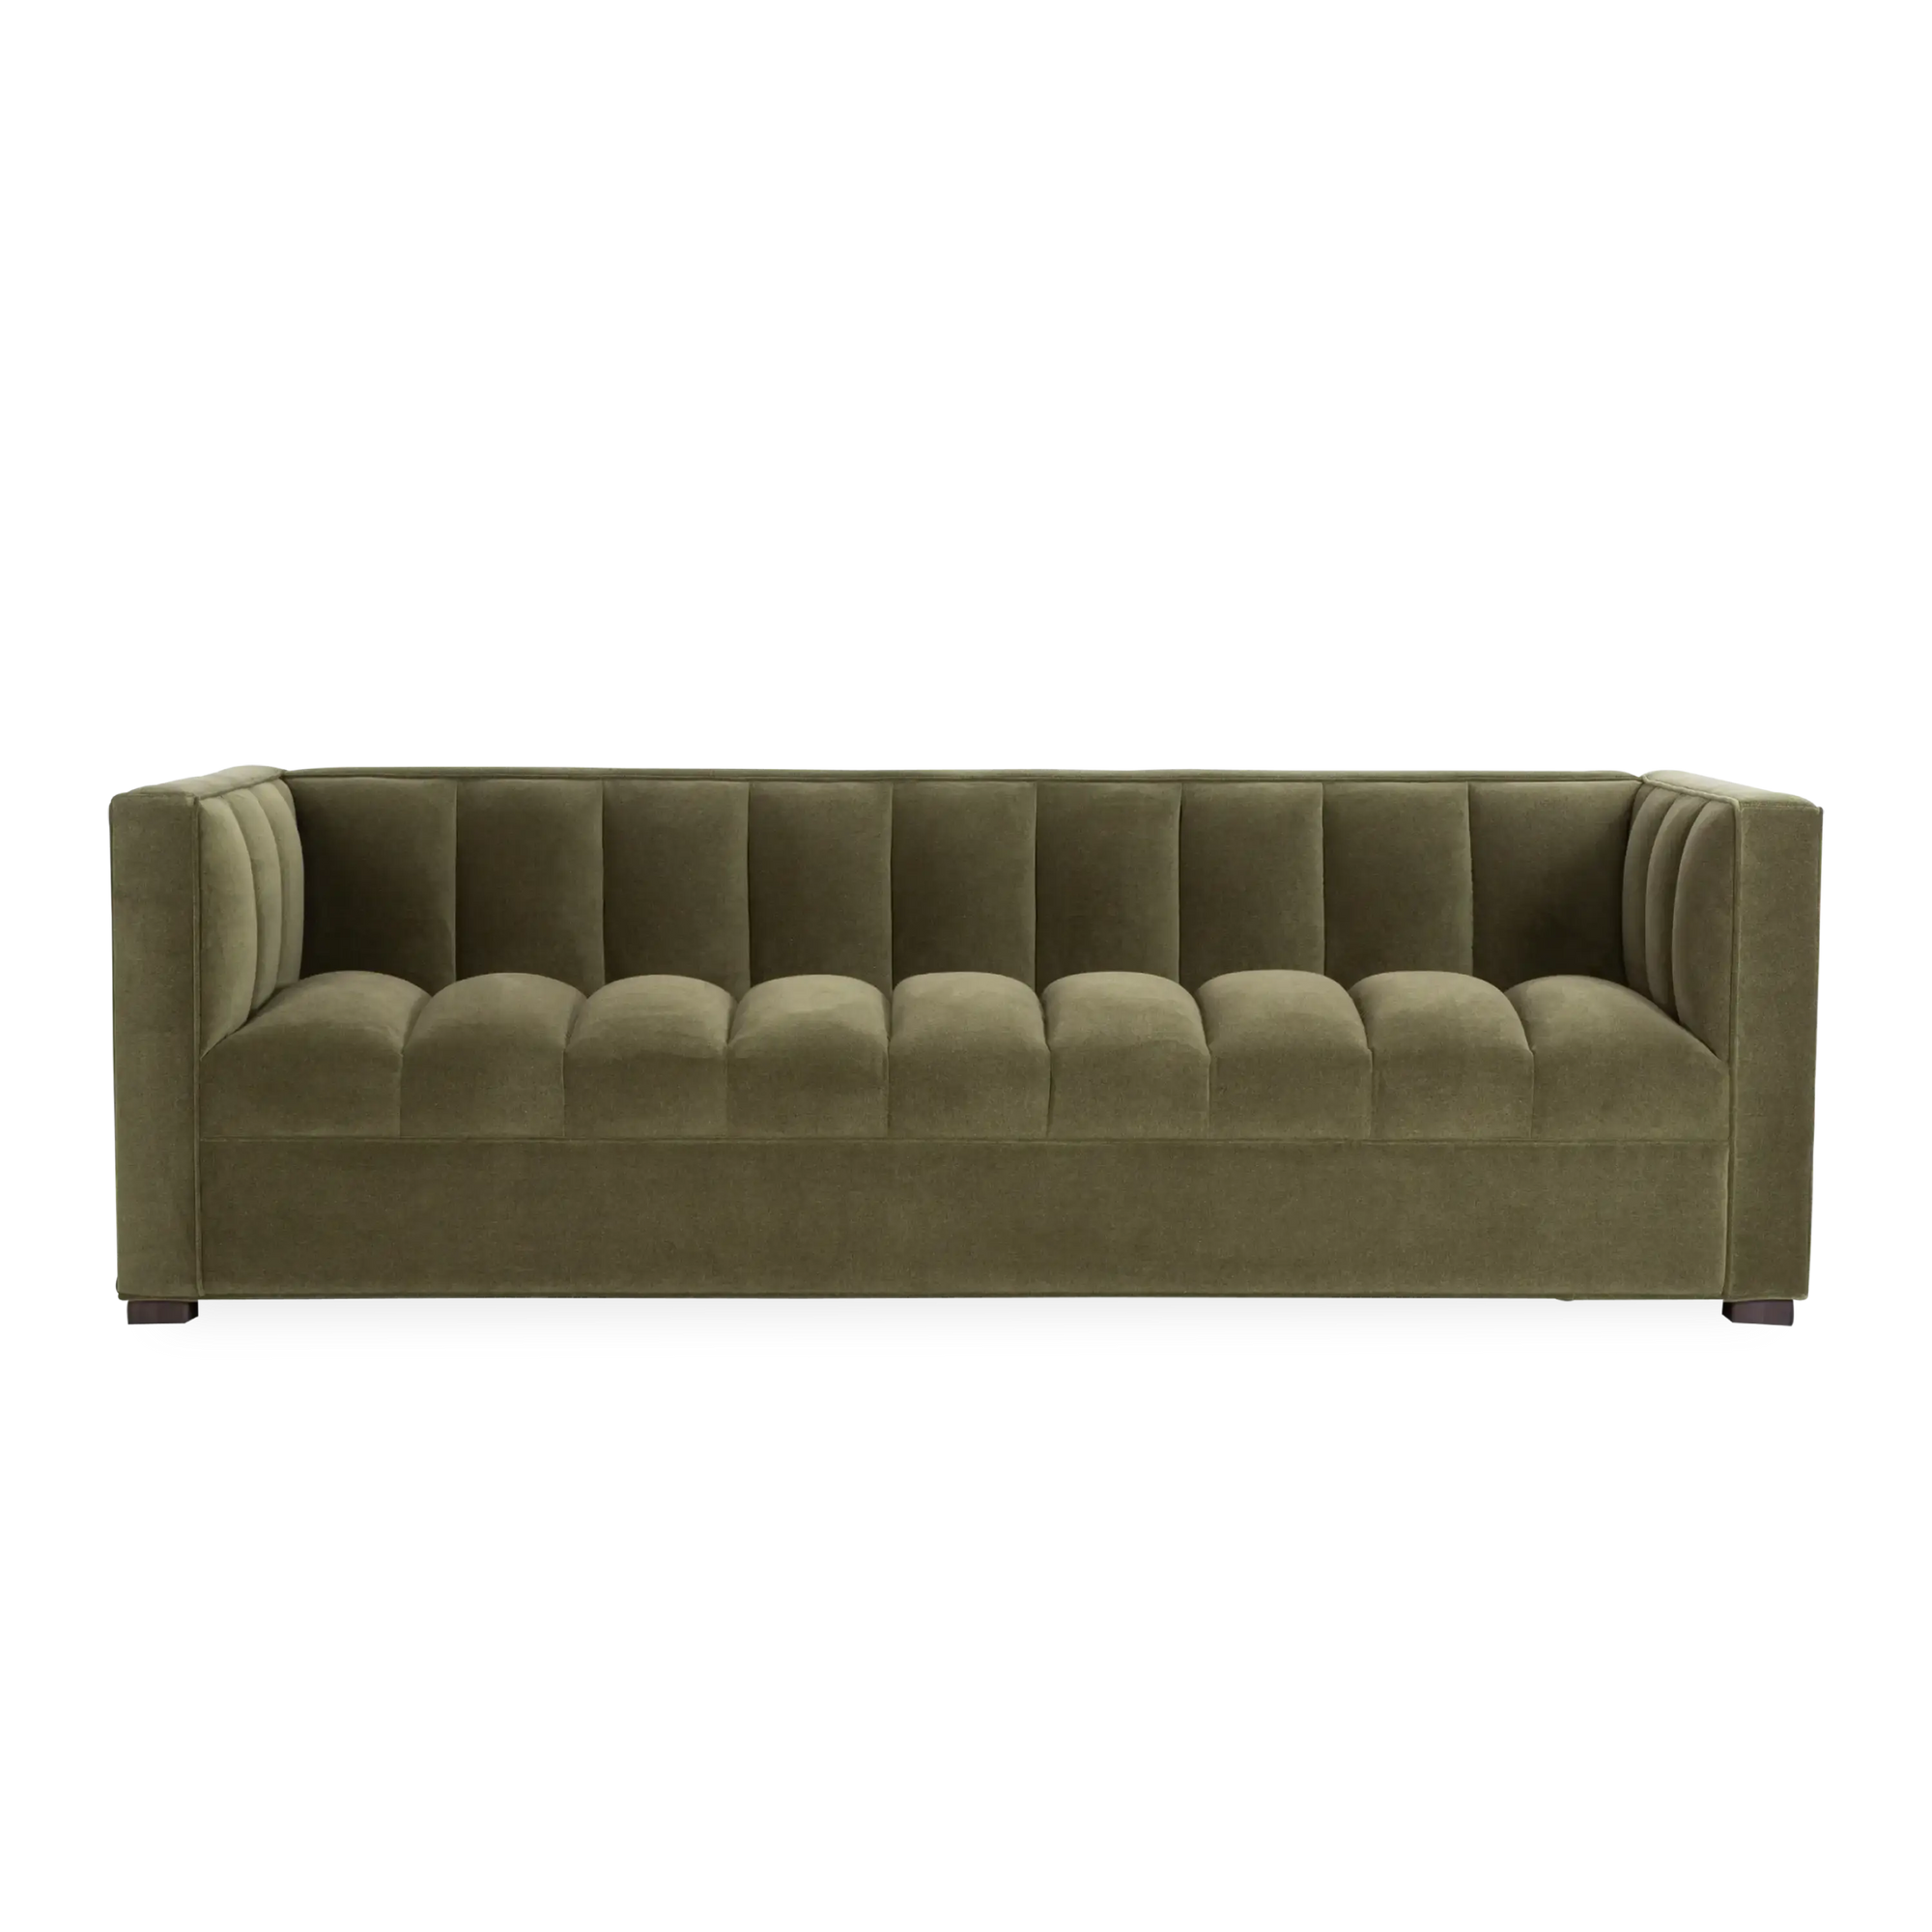 A modern take on the classic tuxedo sofa, the Benito Sofa offers bold proportions for your lounging space.